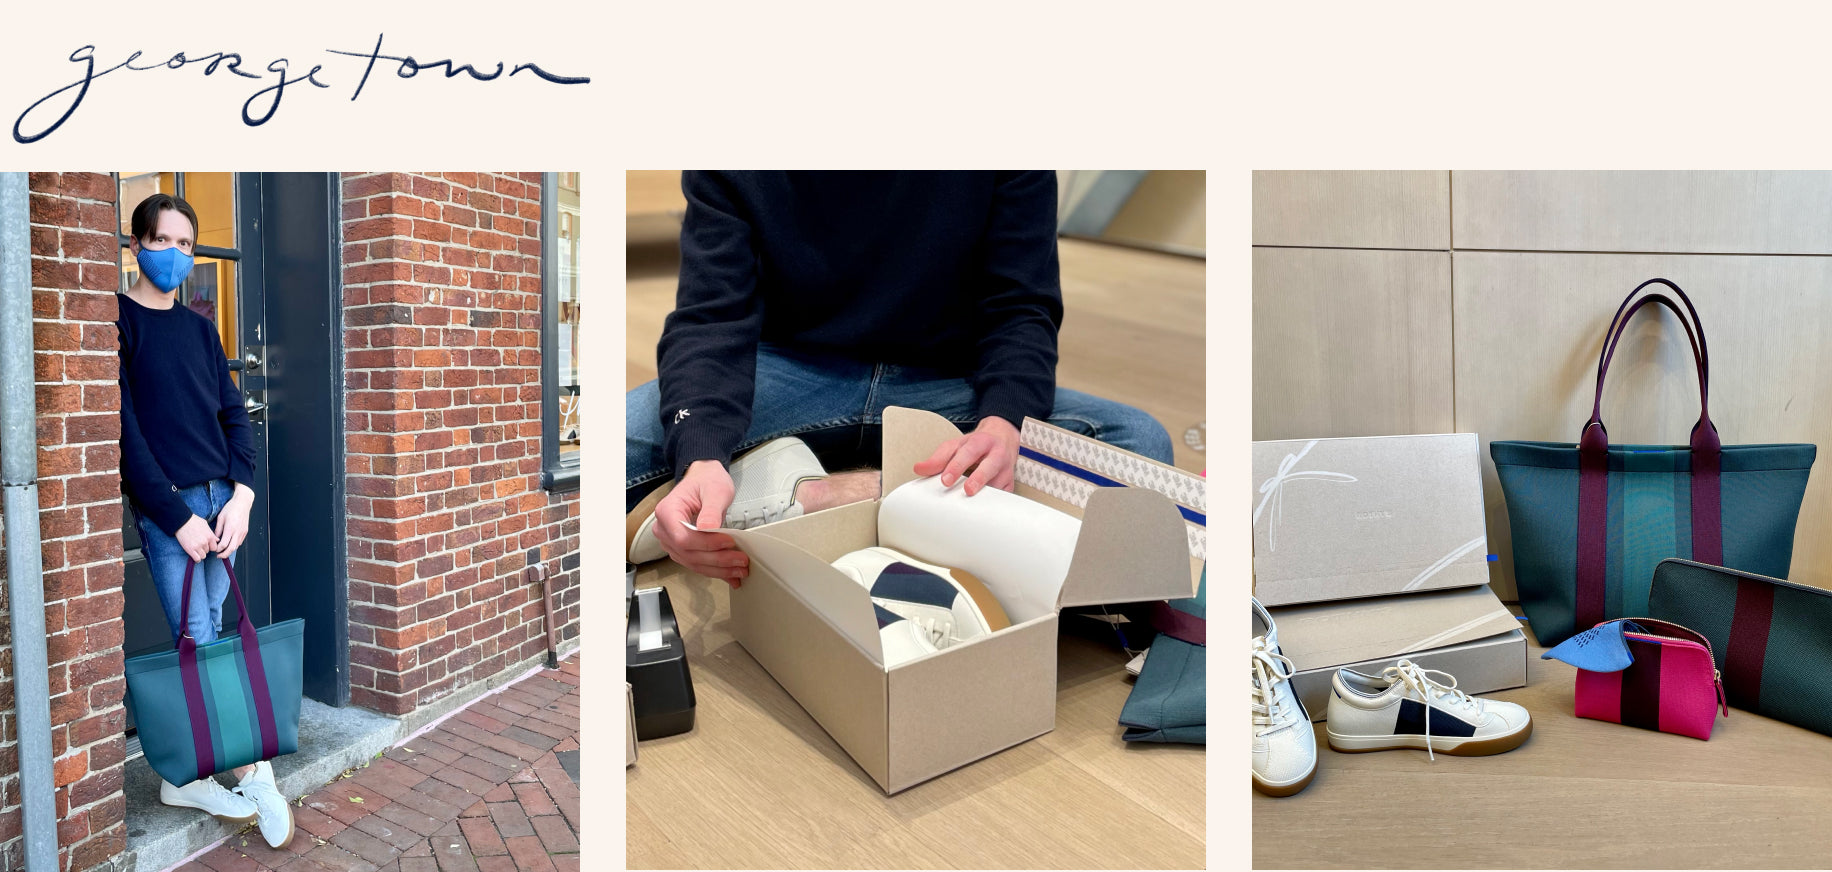 Image with an illustration of the word “Georgetown”, with pictures of a Rothy’s retail team member wearing a bright blue mask and holding The Essential Tote in Deep Spruce, a close up of him opening a shoebox, and a lineup of Rothy’s bags and shoes. 